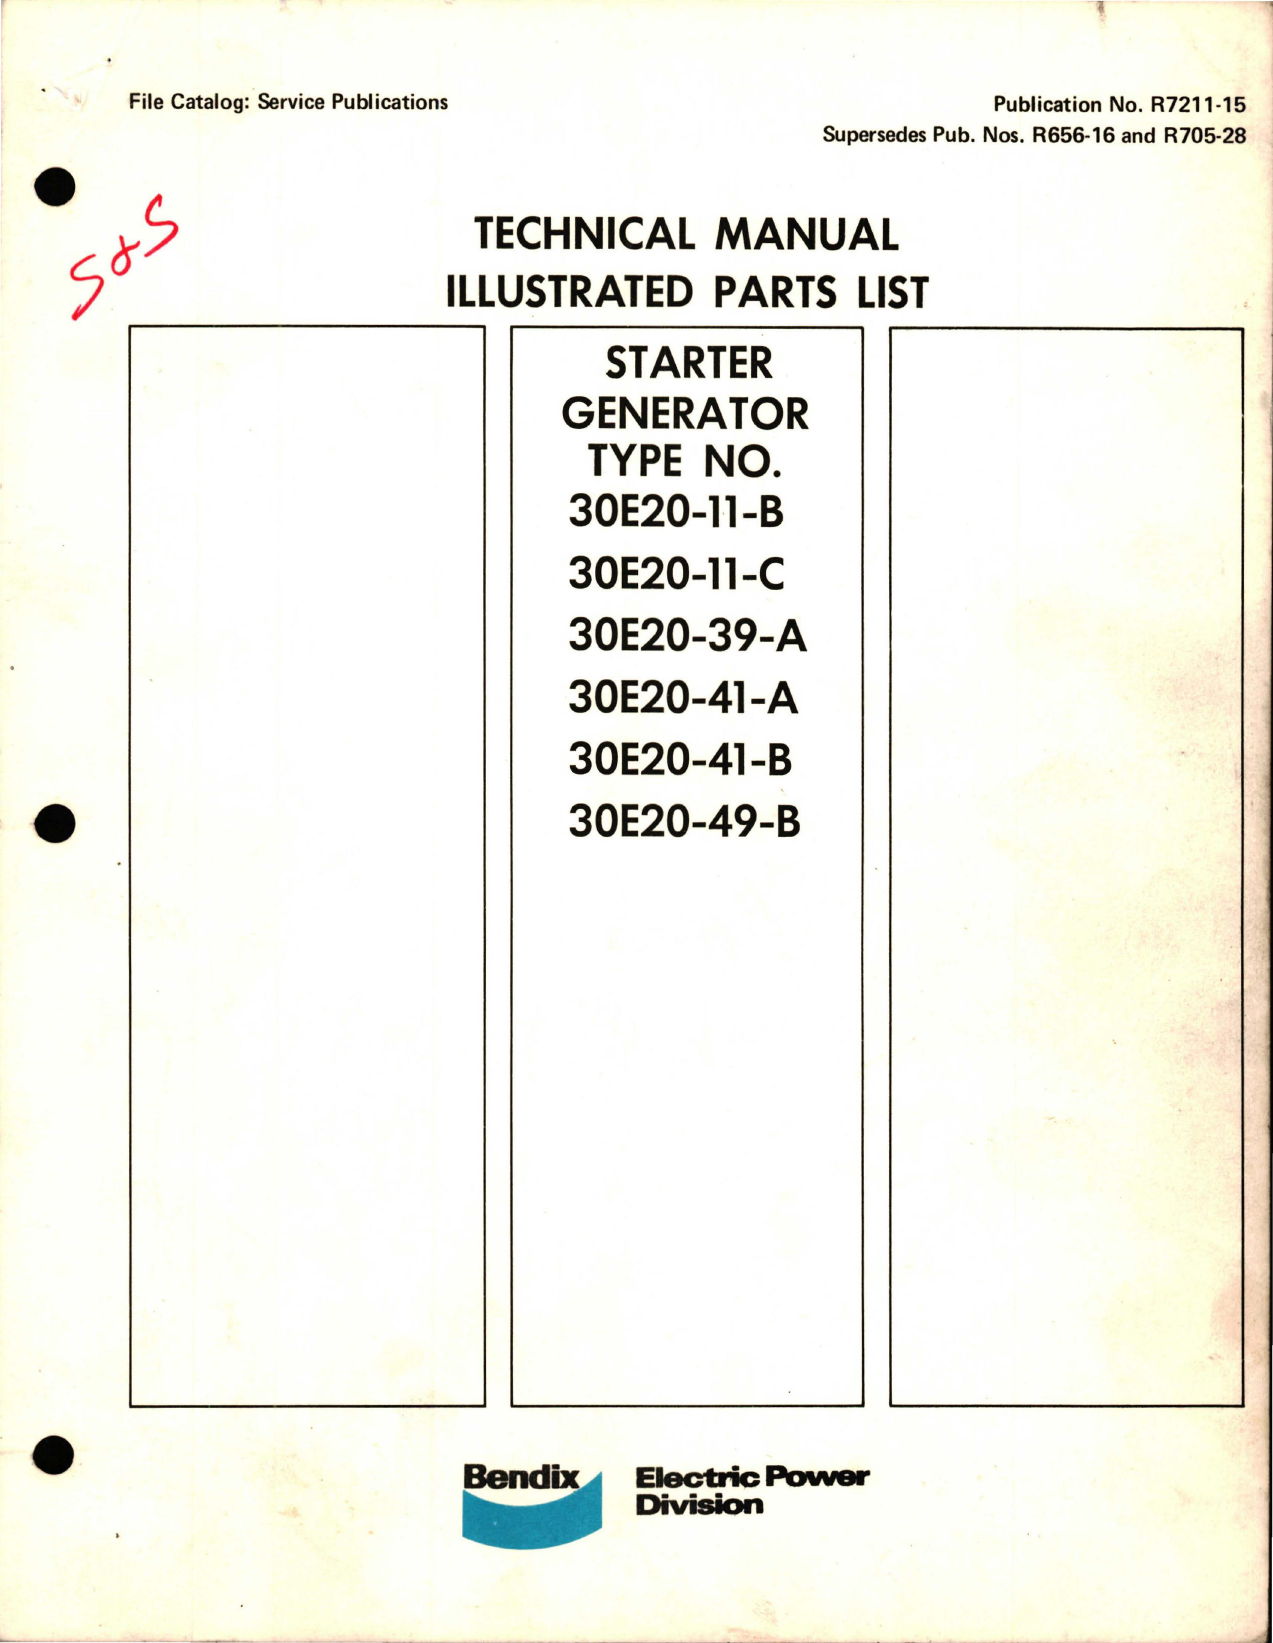 Sample page 1 from AirCorps Library document: Illustrated Parts List for Starter Generator